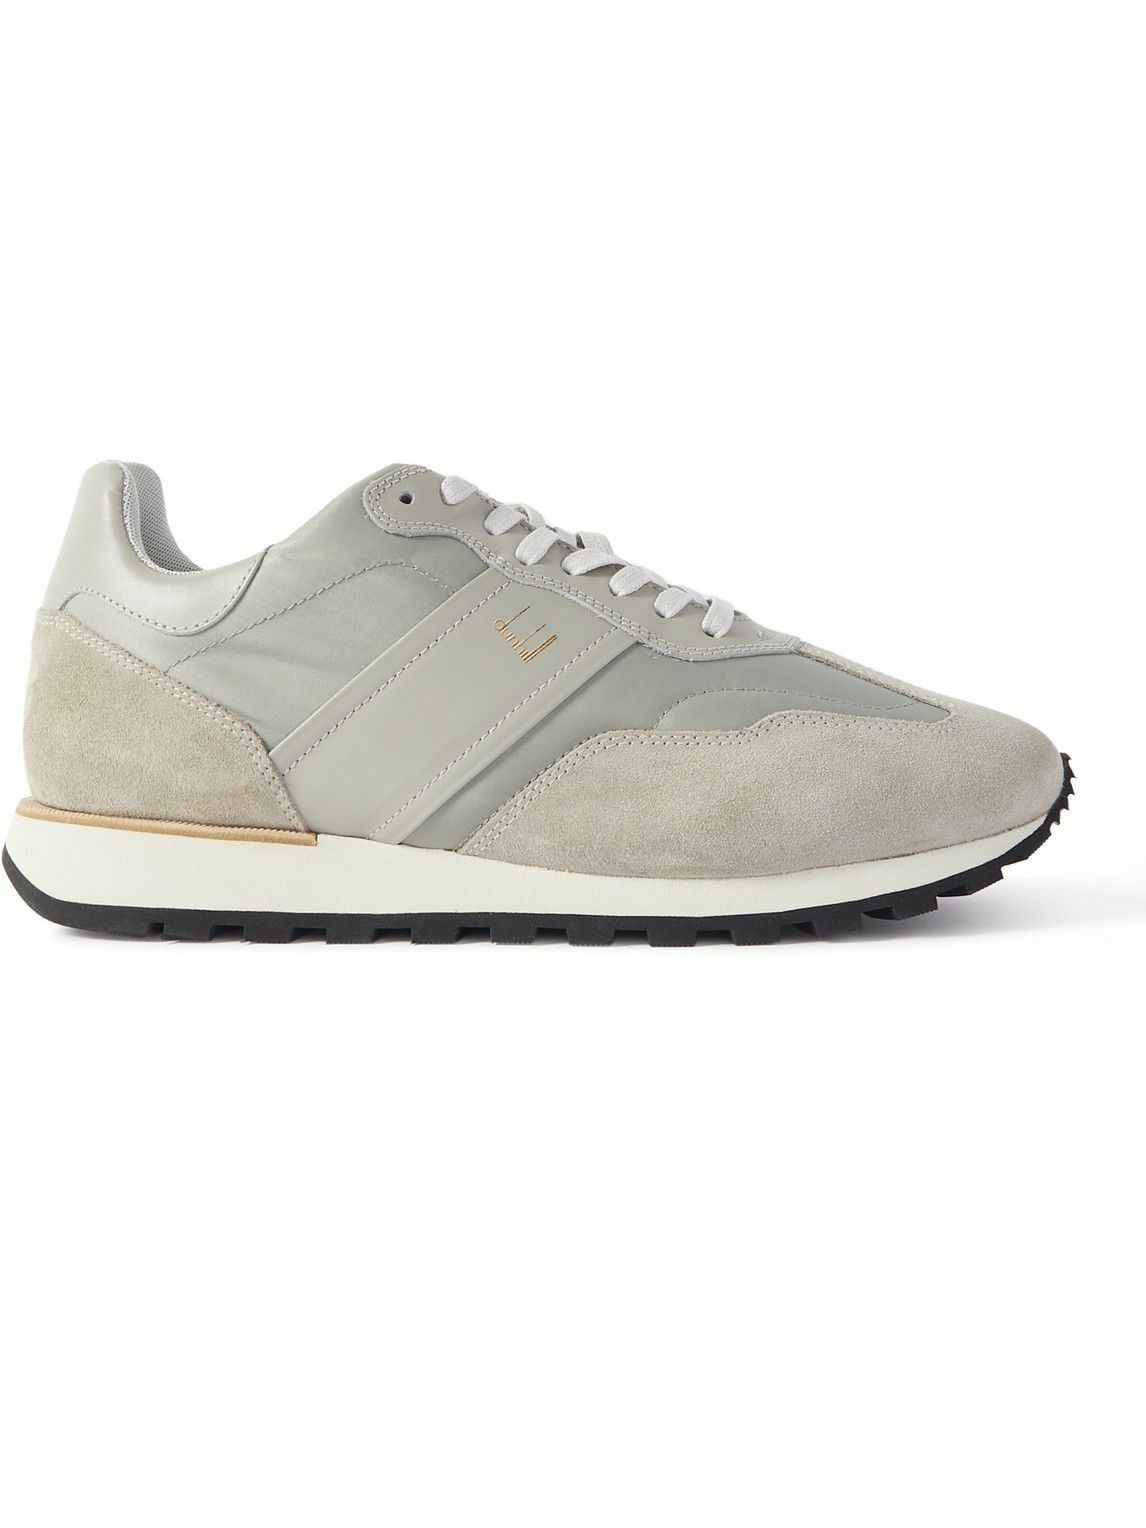 Dunhill - Legacy Runner Suede-Trimmed Leather and Nylon Sneakers - Gray ...